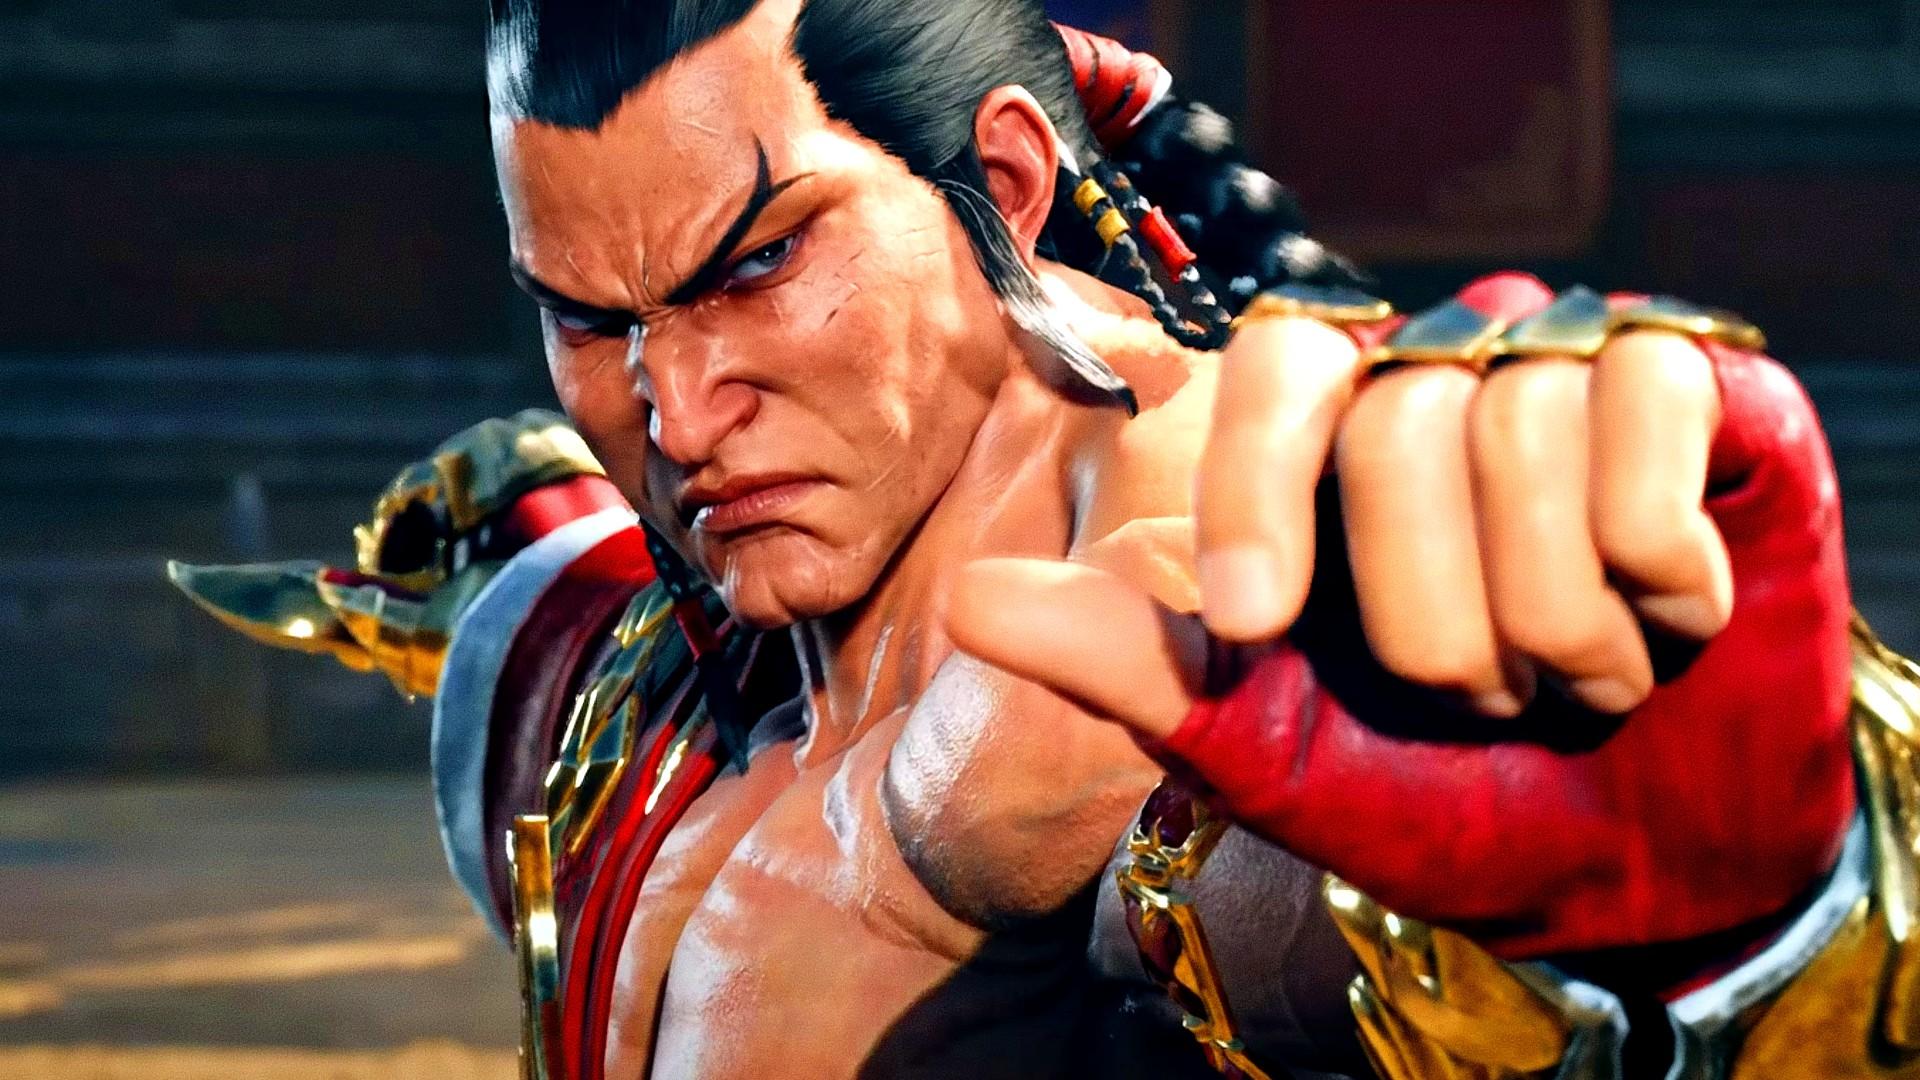 Another Tekken 8 beta is on the way and you can sign up right now